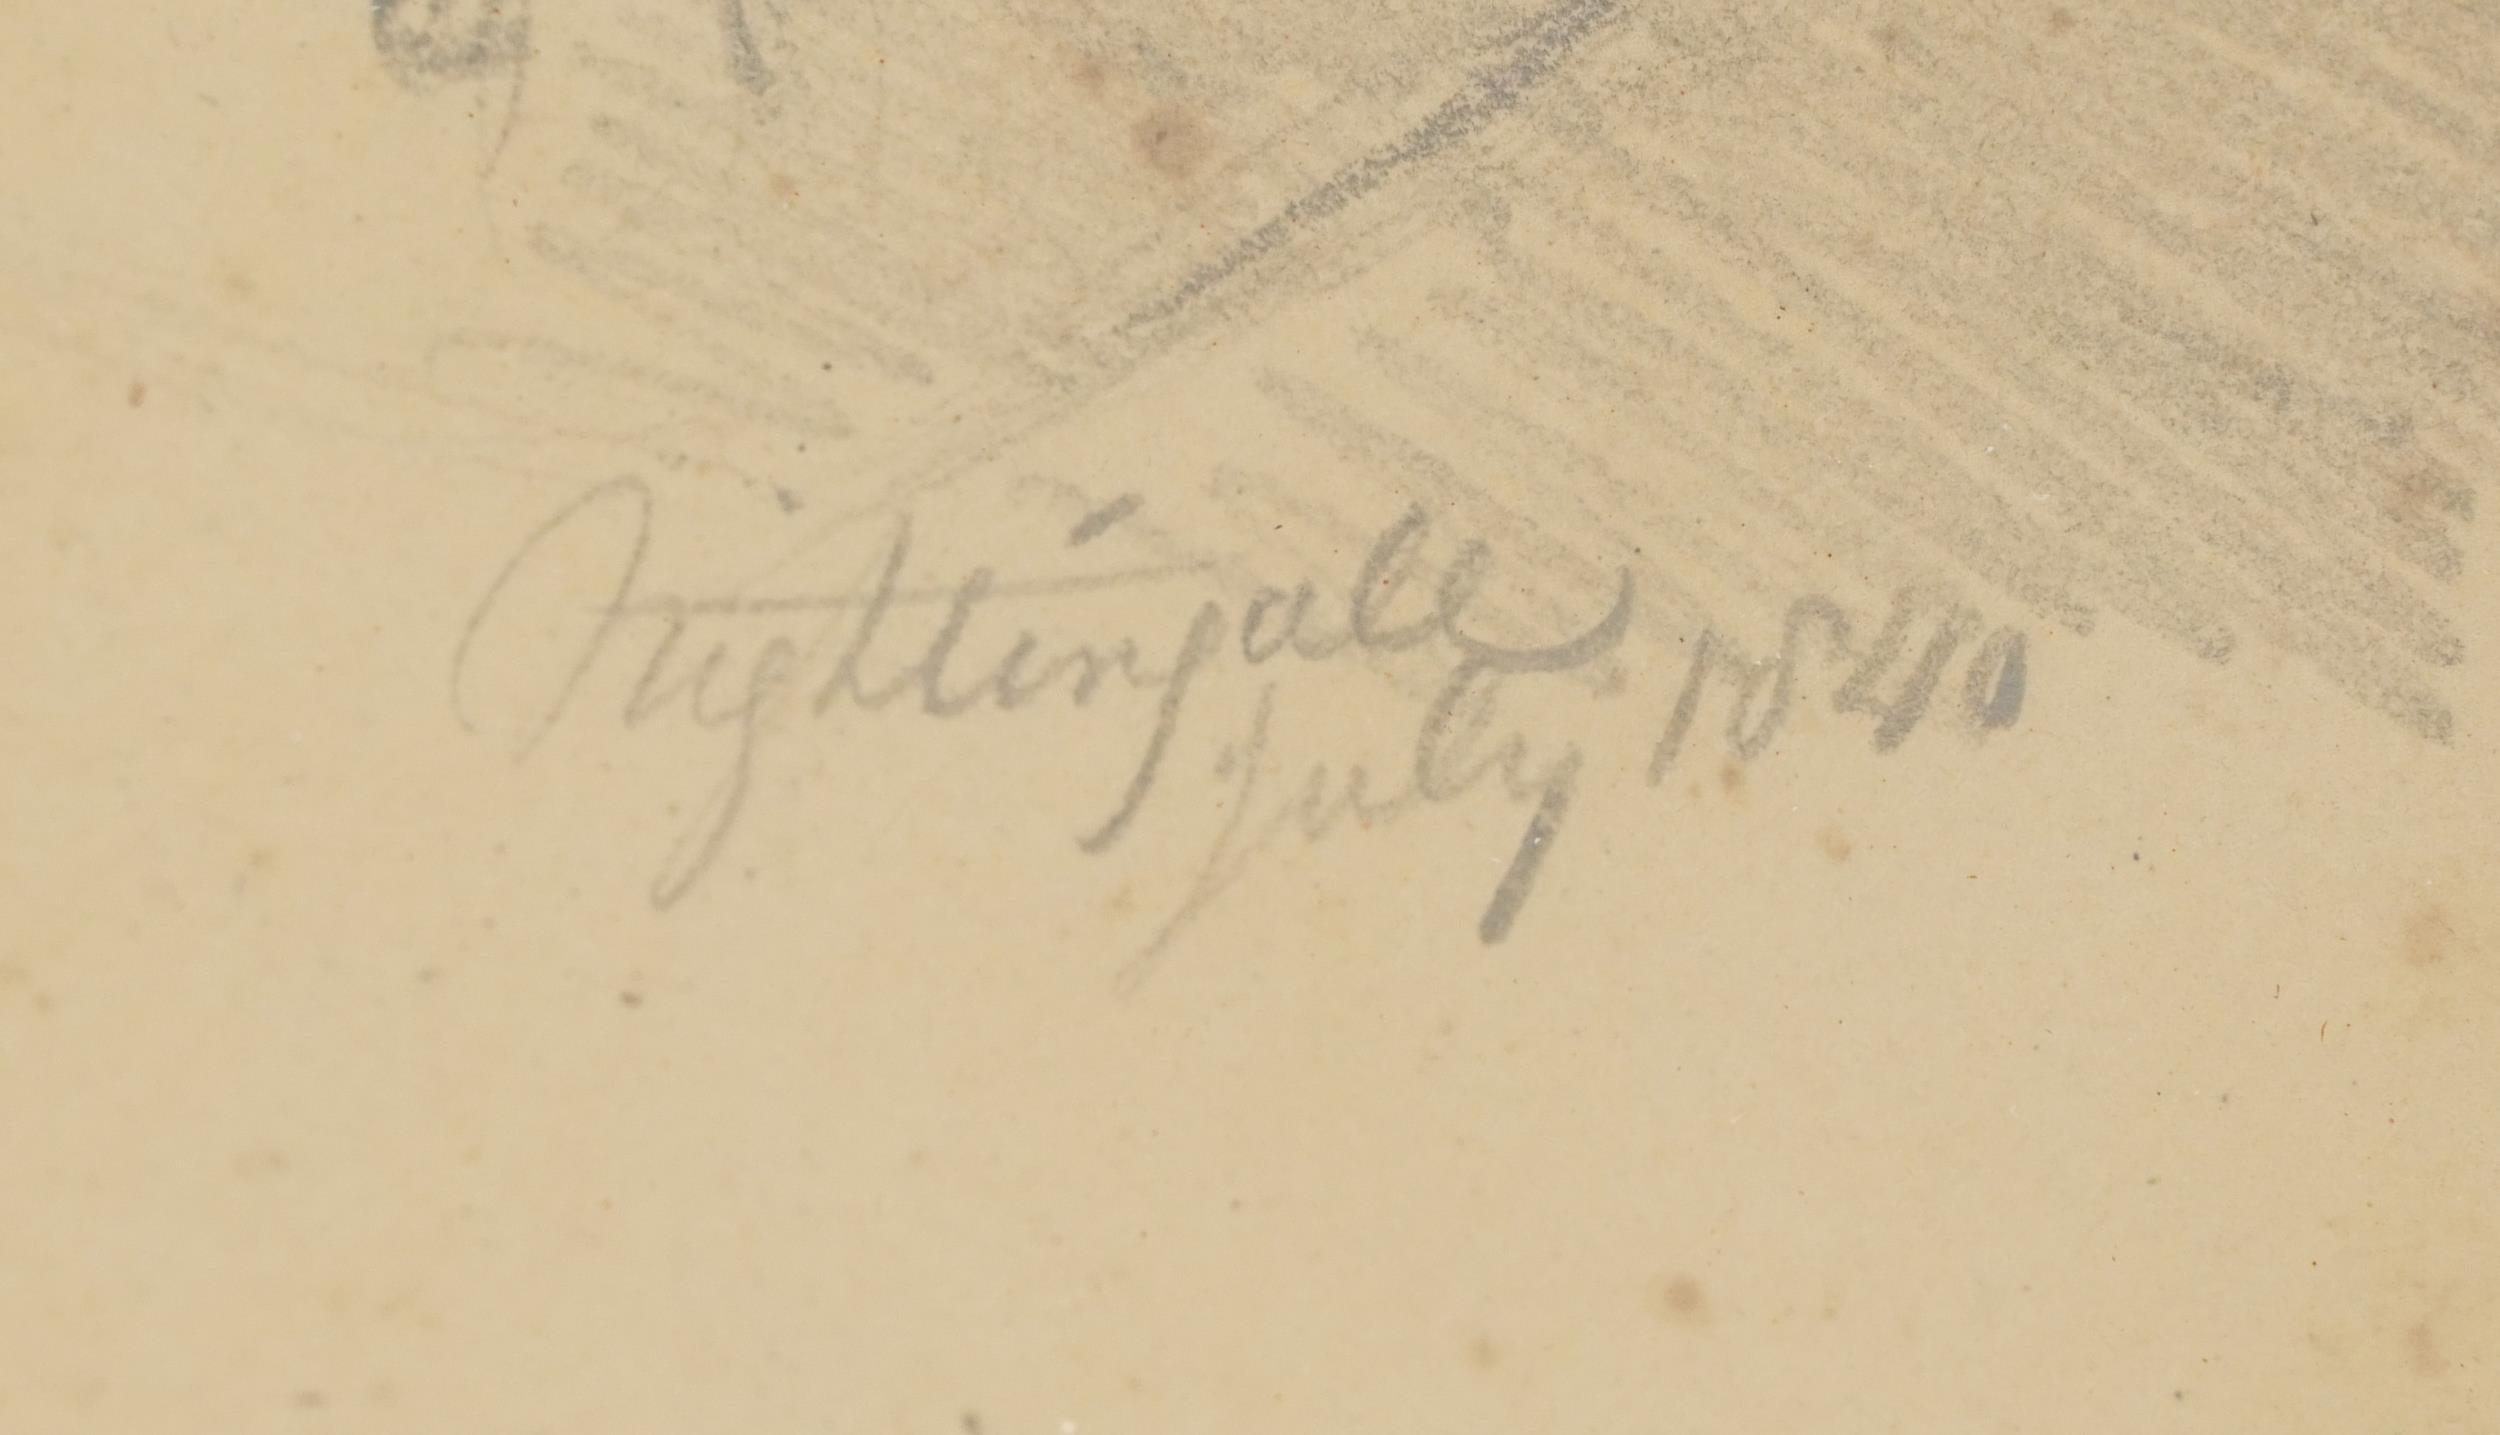 Top half portrait of a gentleman wearing a white cravat, mid 19th century heightened pencil - Image 3 of 4